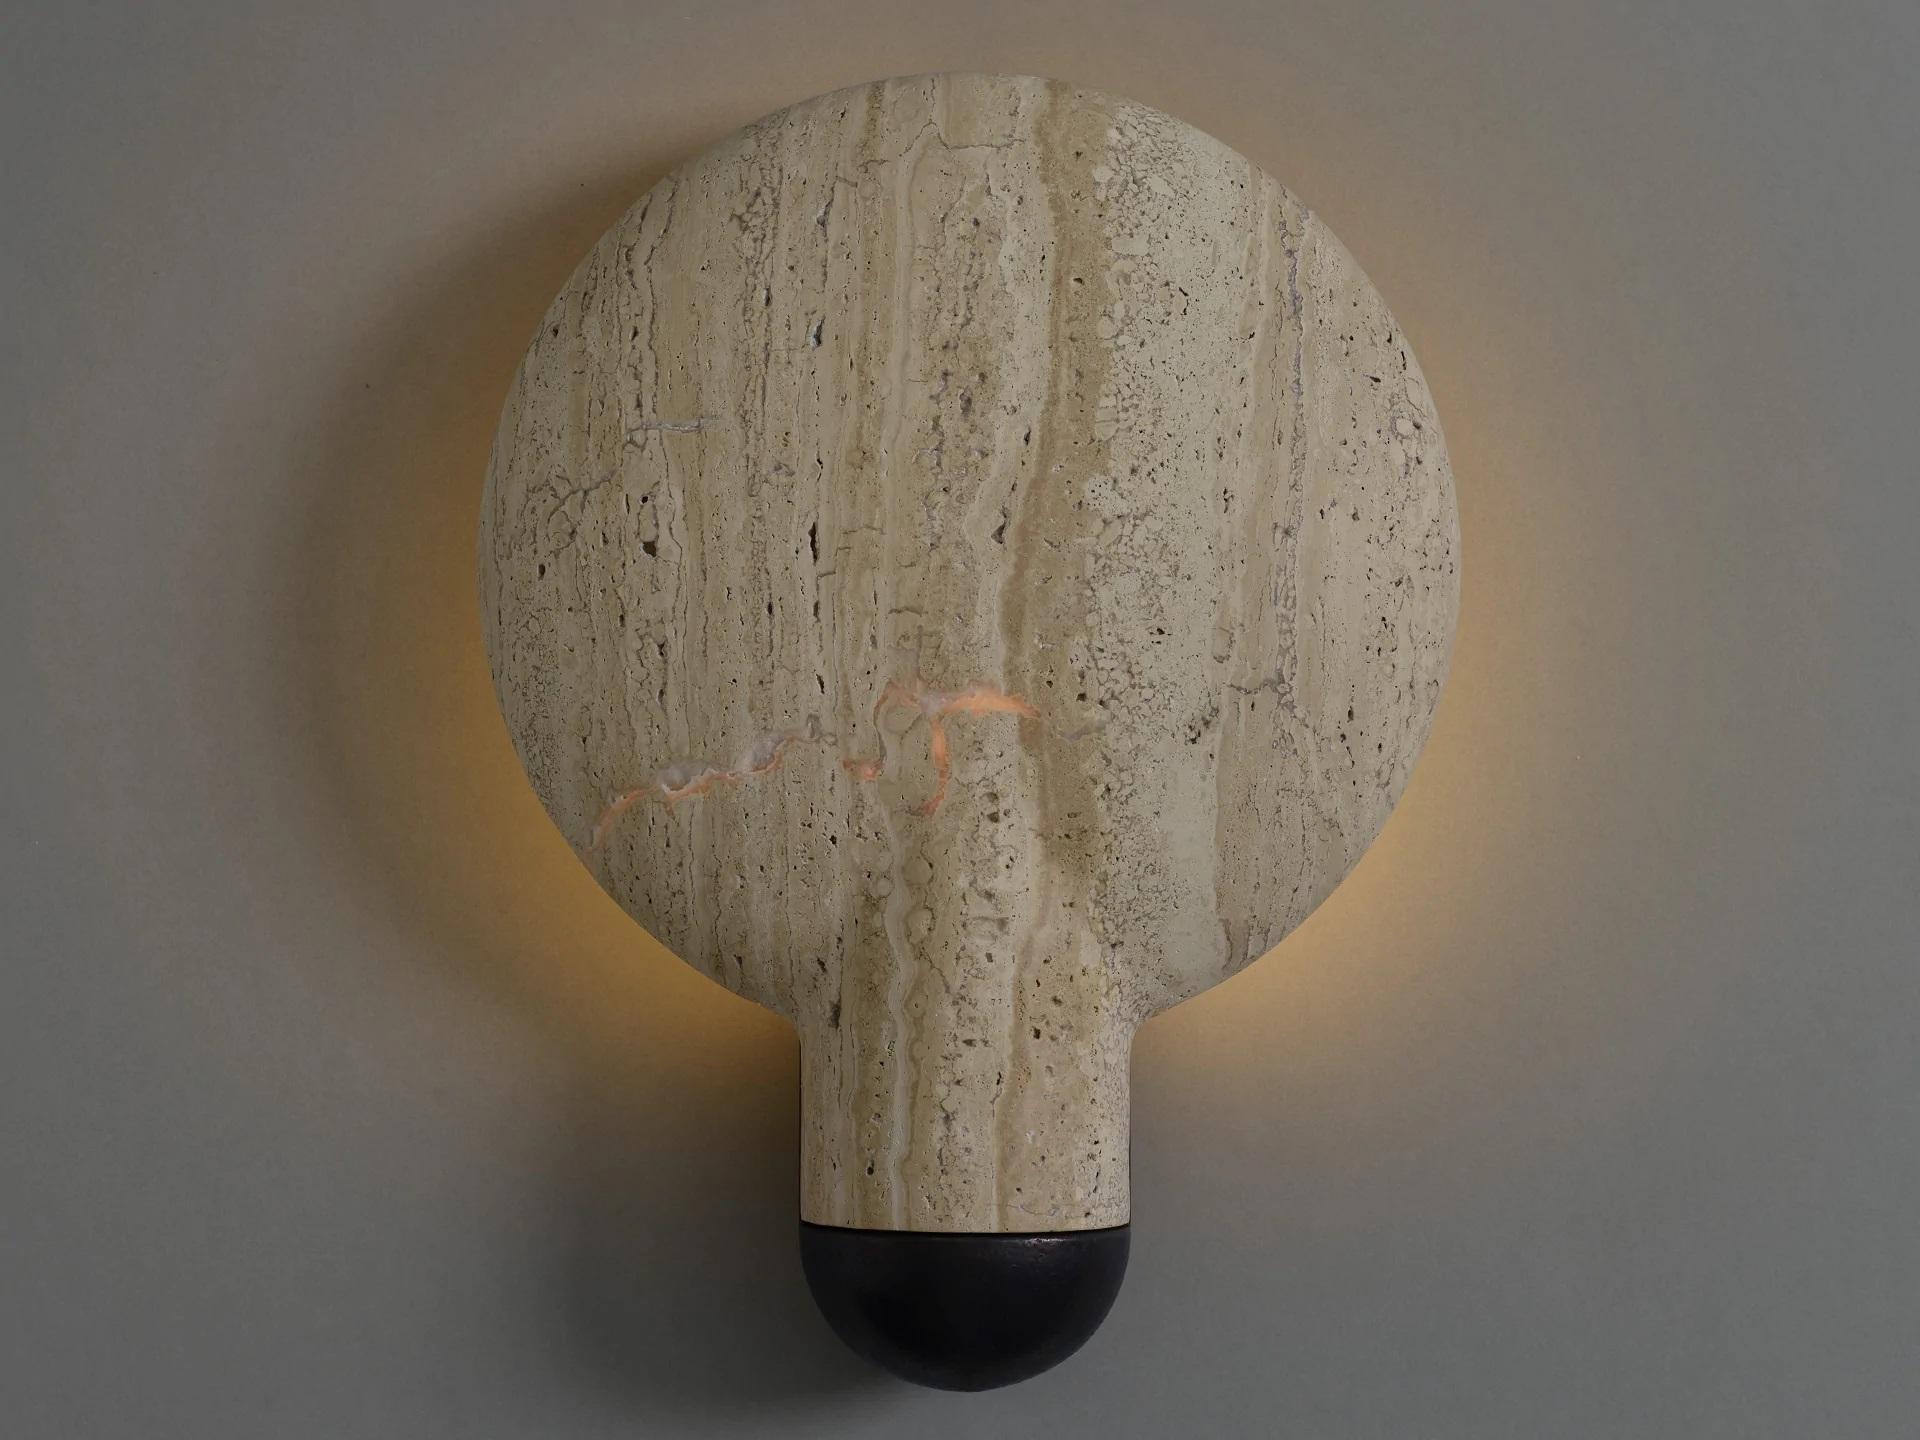 Classico Travertine Surface Wall Sconce by Henry Wilson
Dimensions: W 30 x D 11 x H 40 cm
Materials: Travertine

Sandwiched between two components, the light source is projected onto the concave backing. The light follows the gentle bowl of the dish